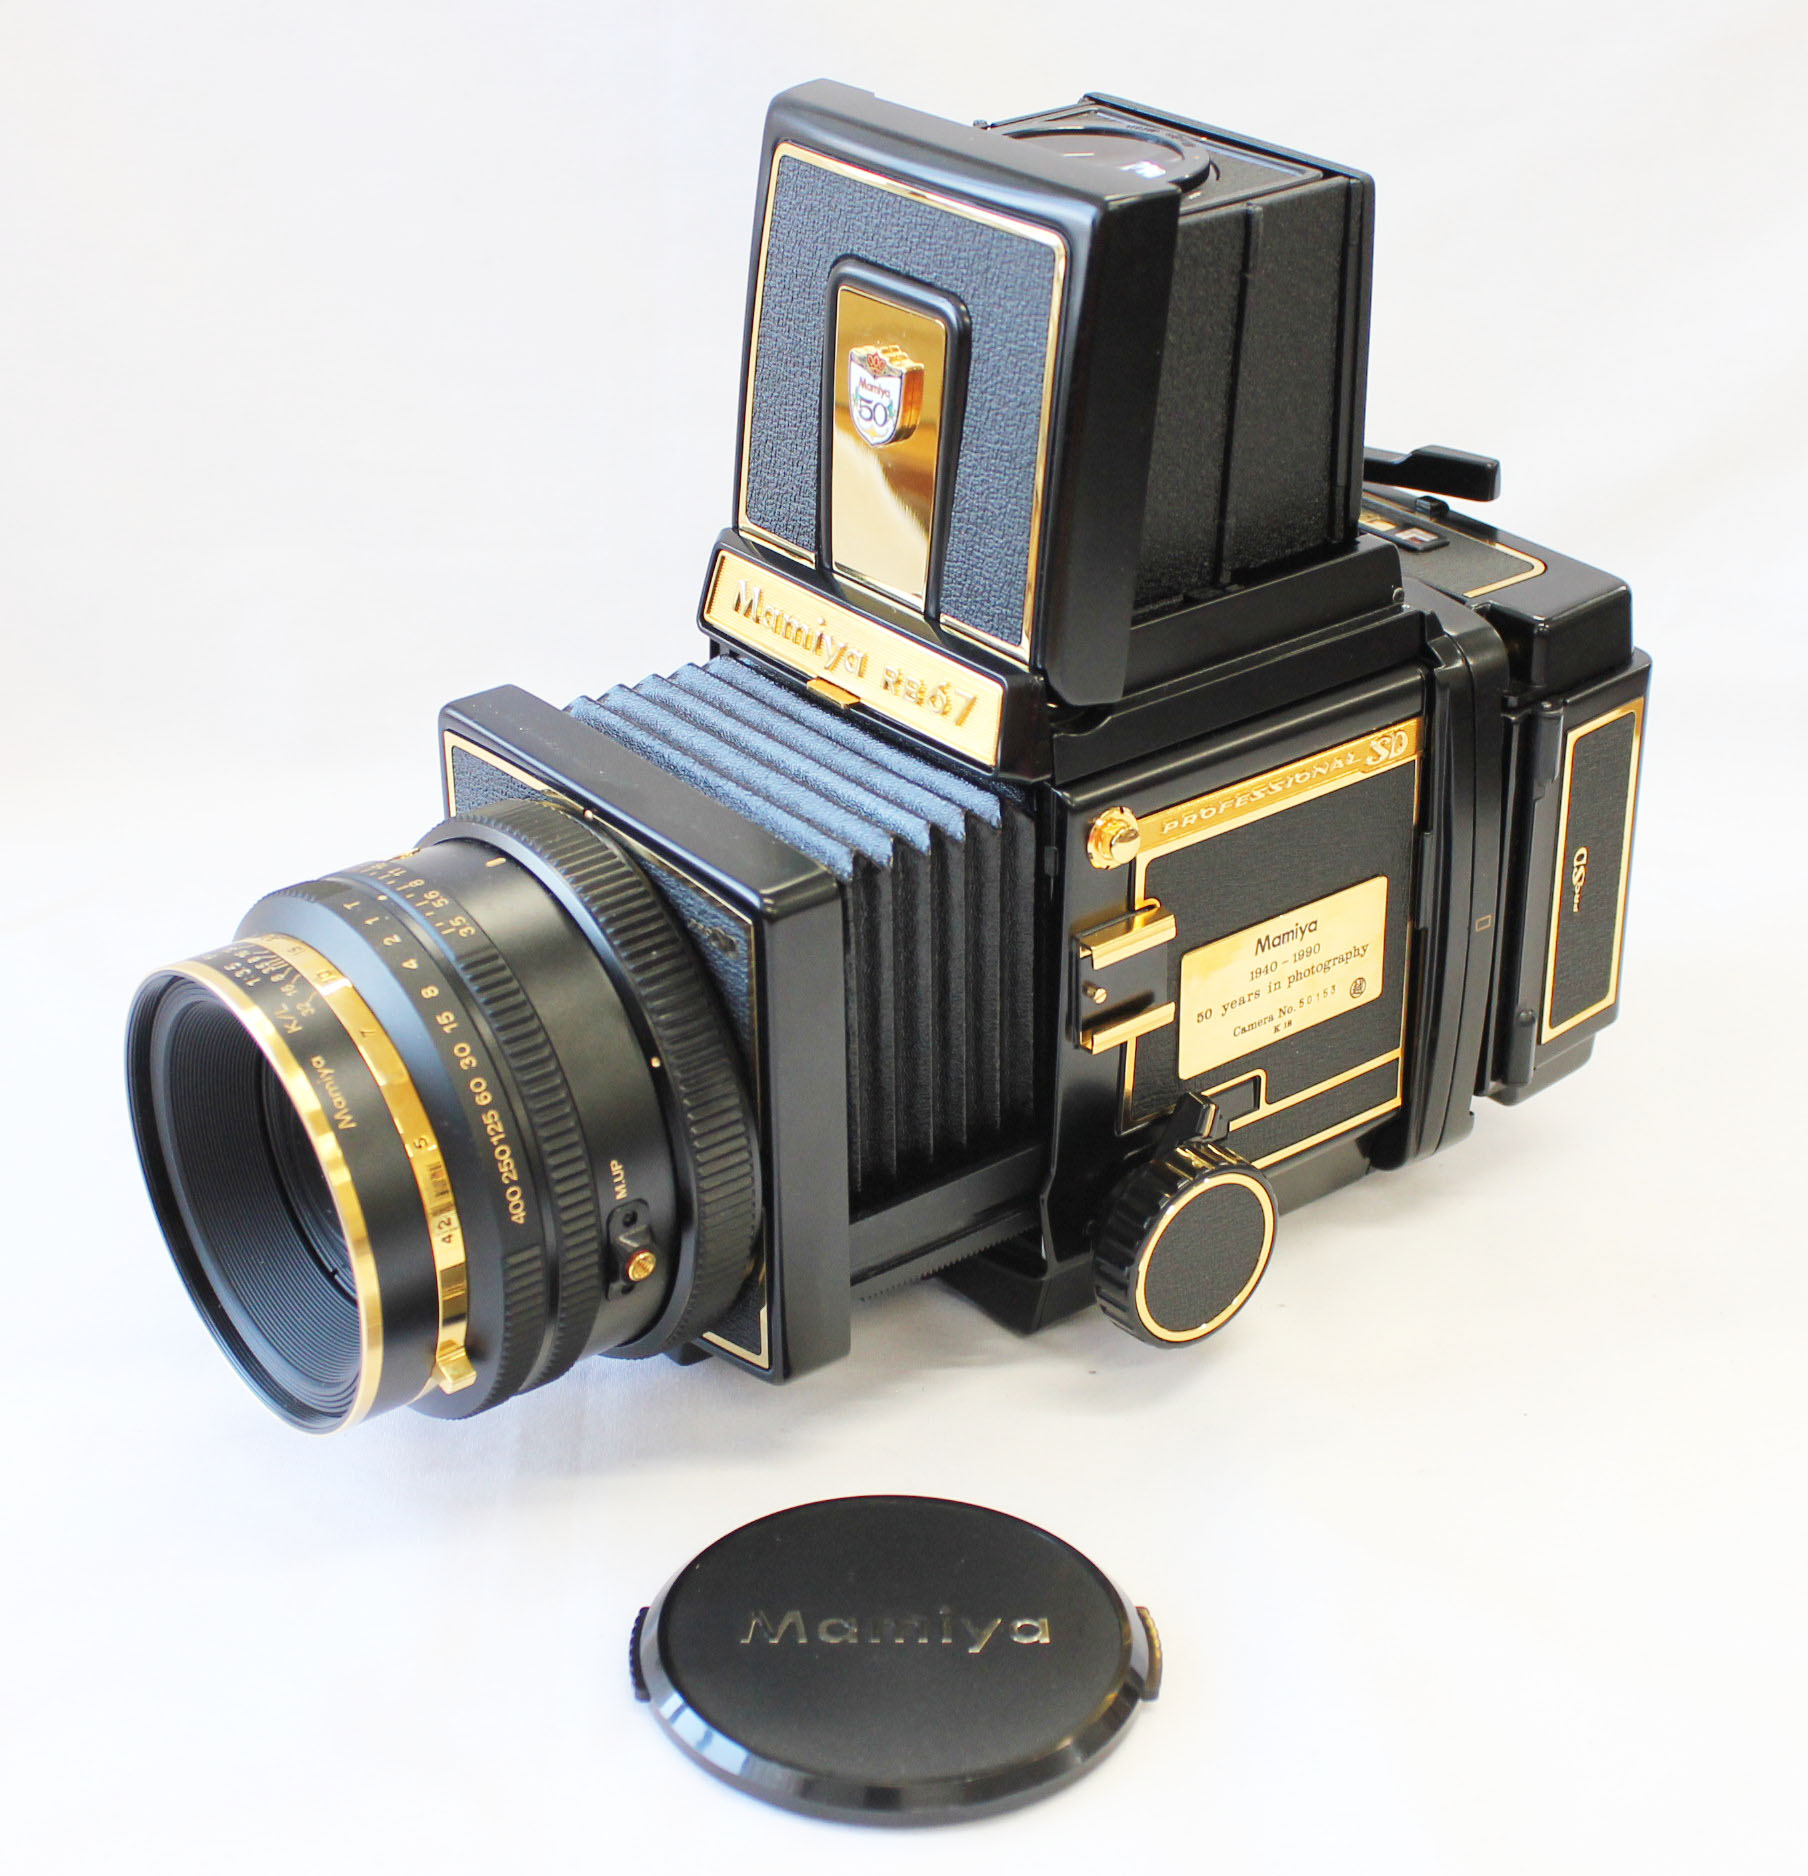 Mamiya RB67 Pro SD Gold K/L 127mm F/3.5 50 Years Limited Edition of 300 from Japan Photo 2